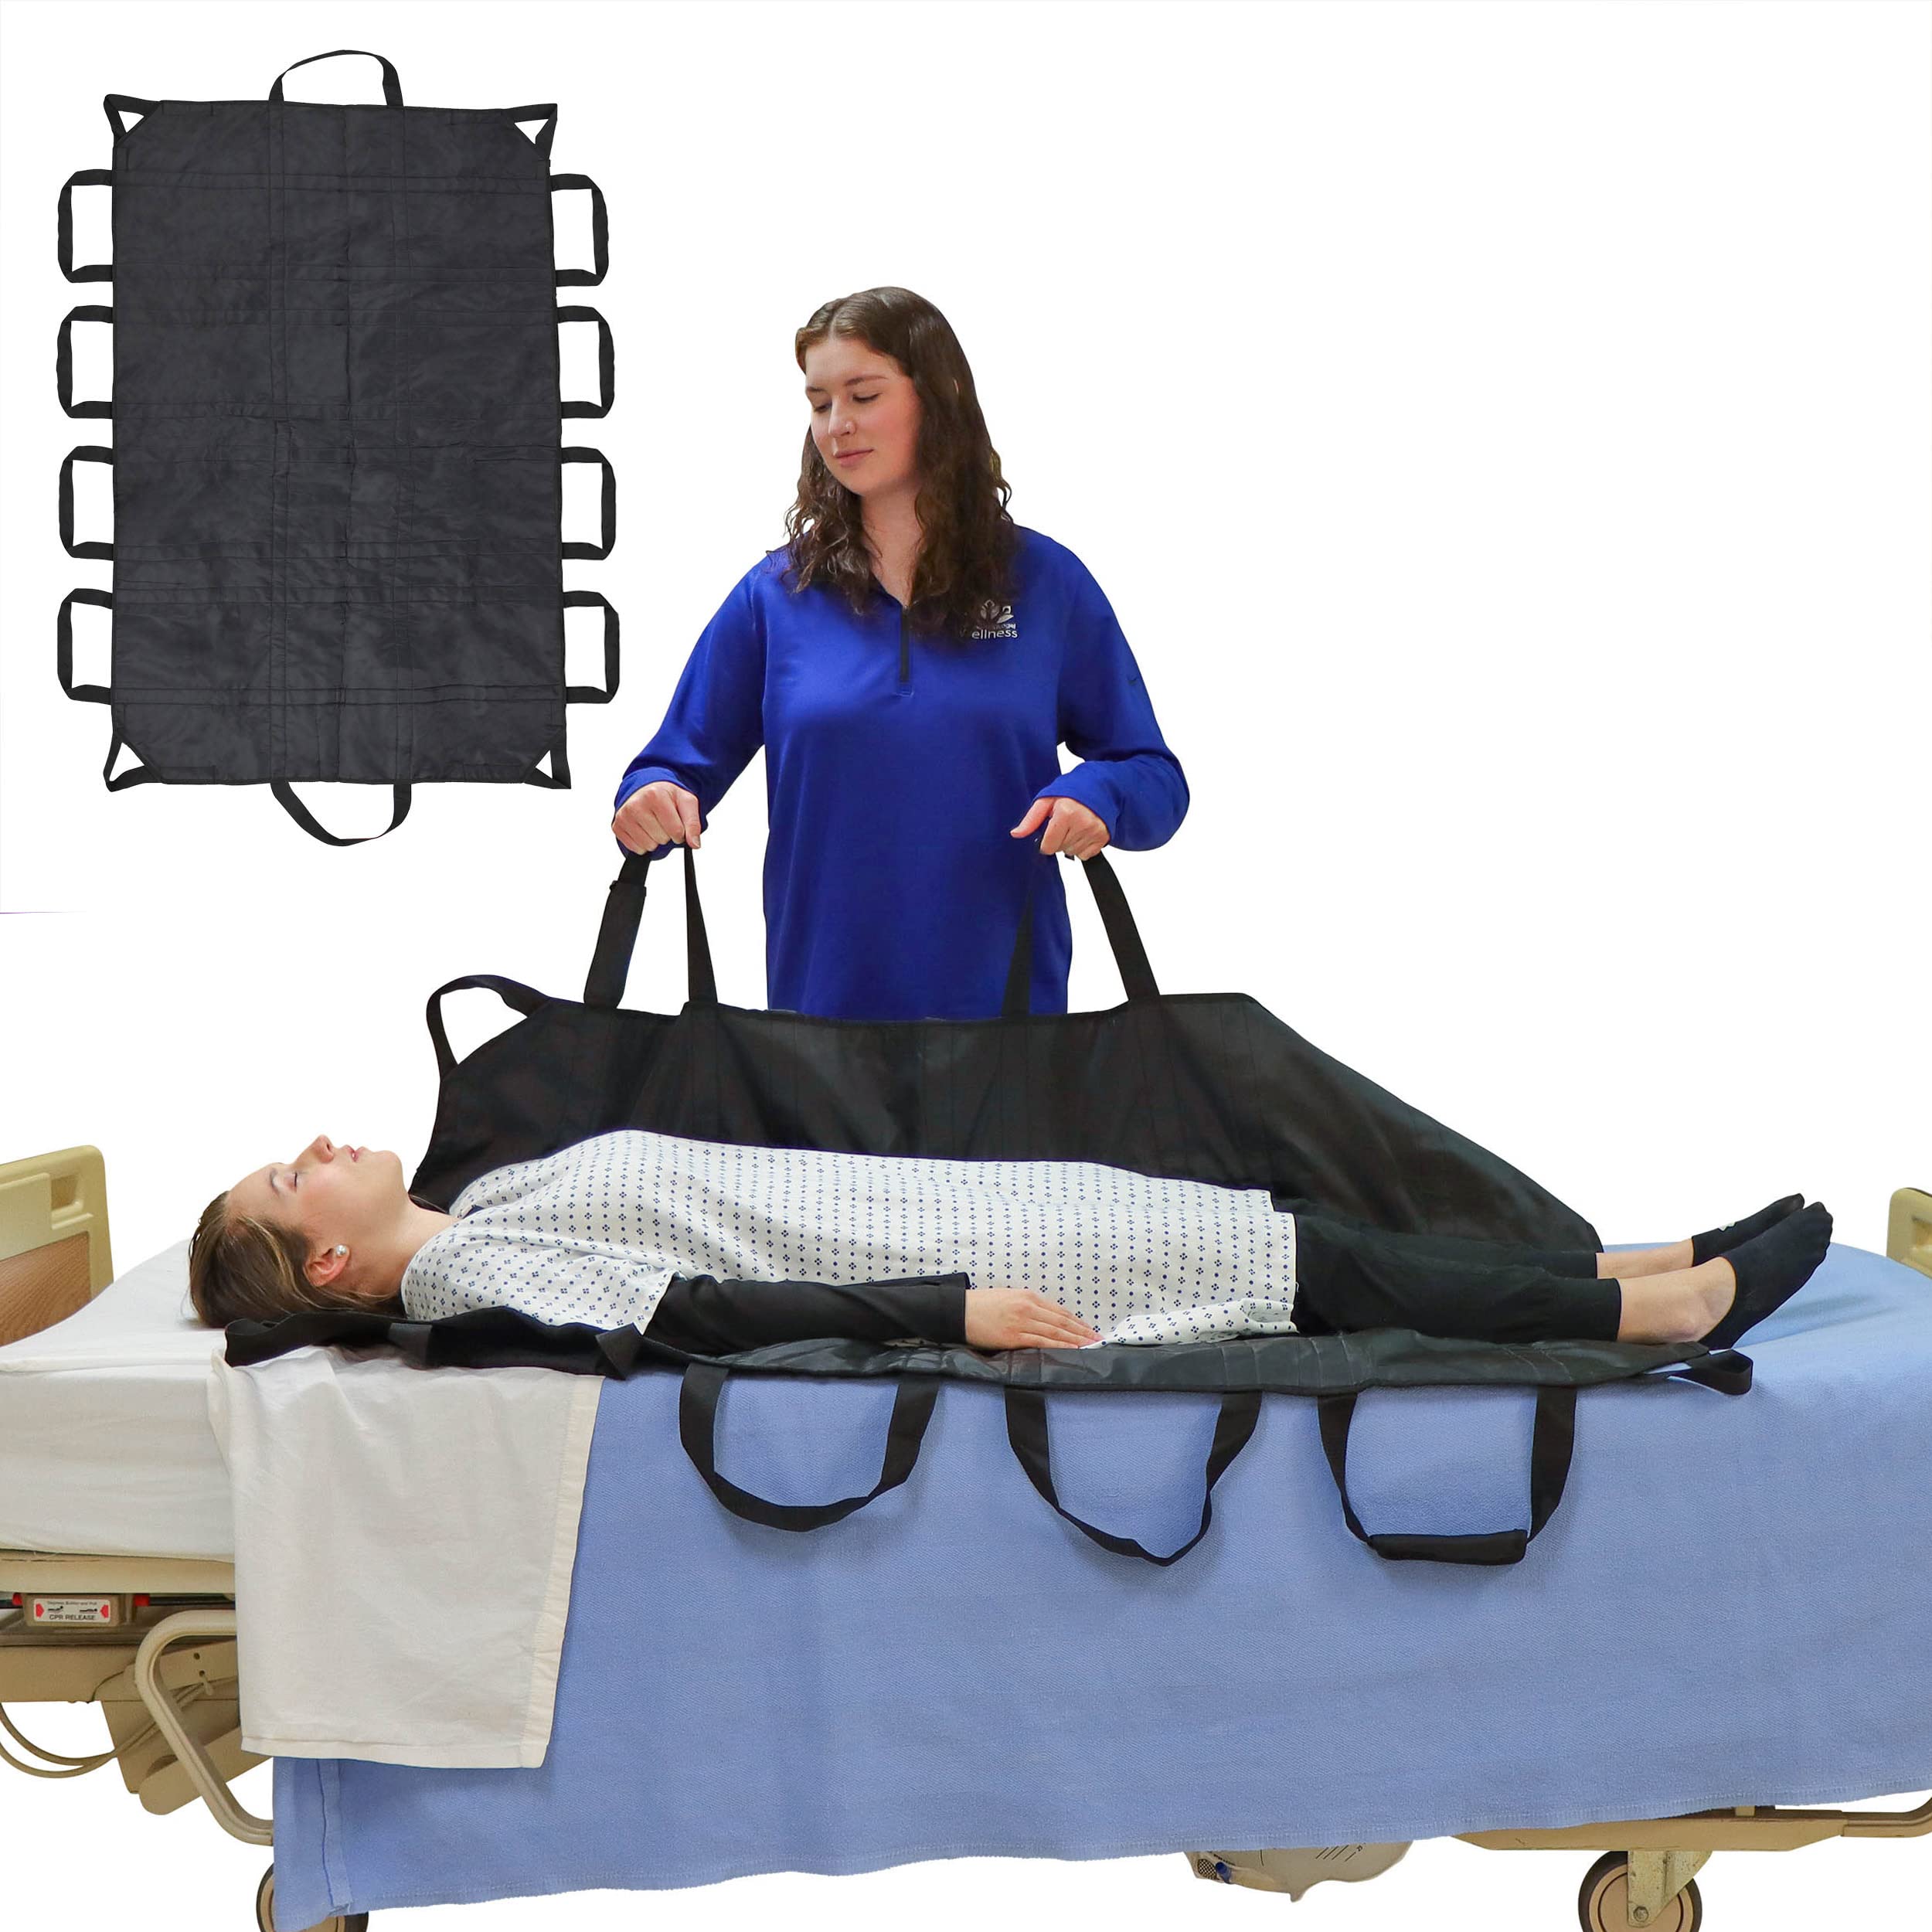 Mondo Medical Washable Bed Pads Elderly Assistance Products 450lbs - 60x40in Draw Sheet Positioning Bed Pad with Handles - Caregiver Supplies Black Slide Sheets for Bedridden Patients with Case